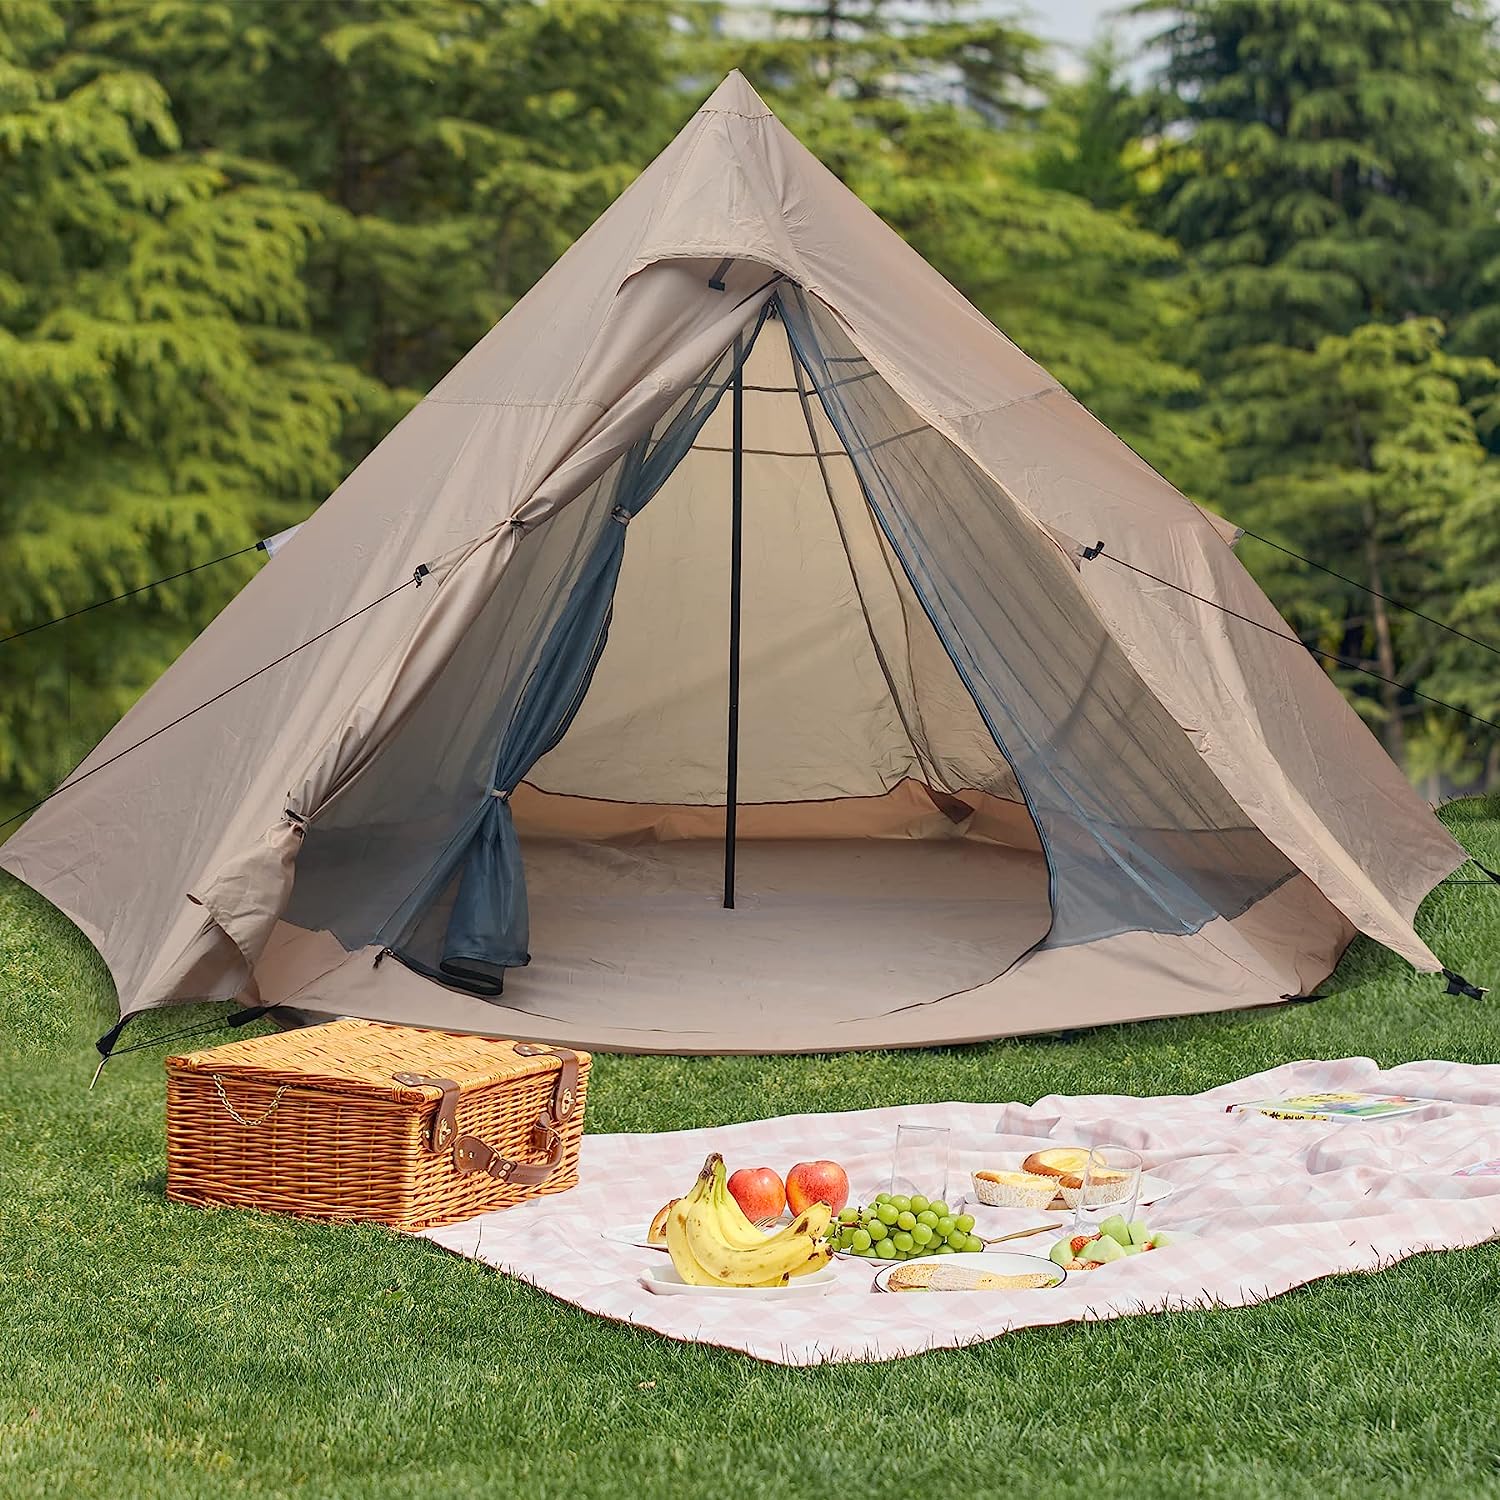 Redcamp Pyramid Tent Teepee Tent Camping